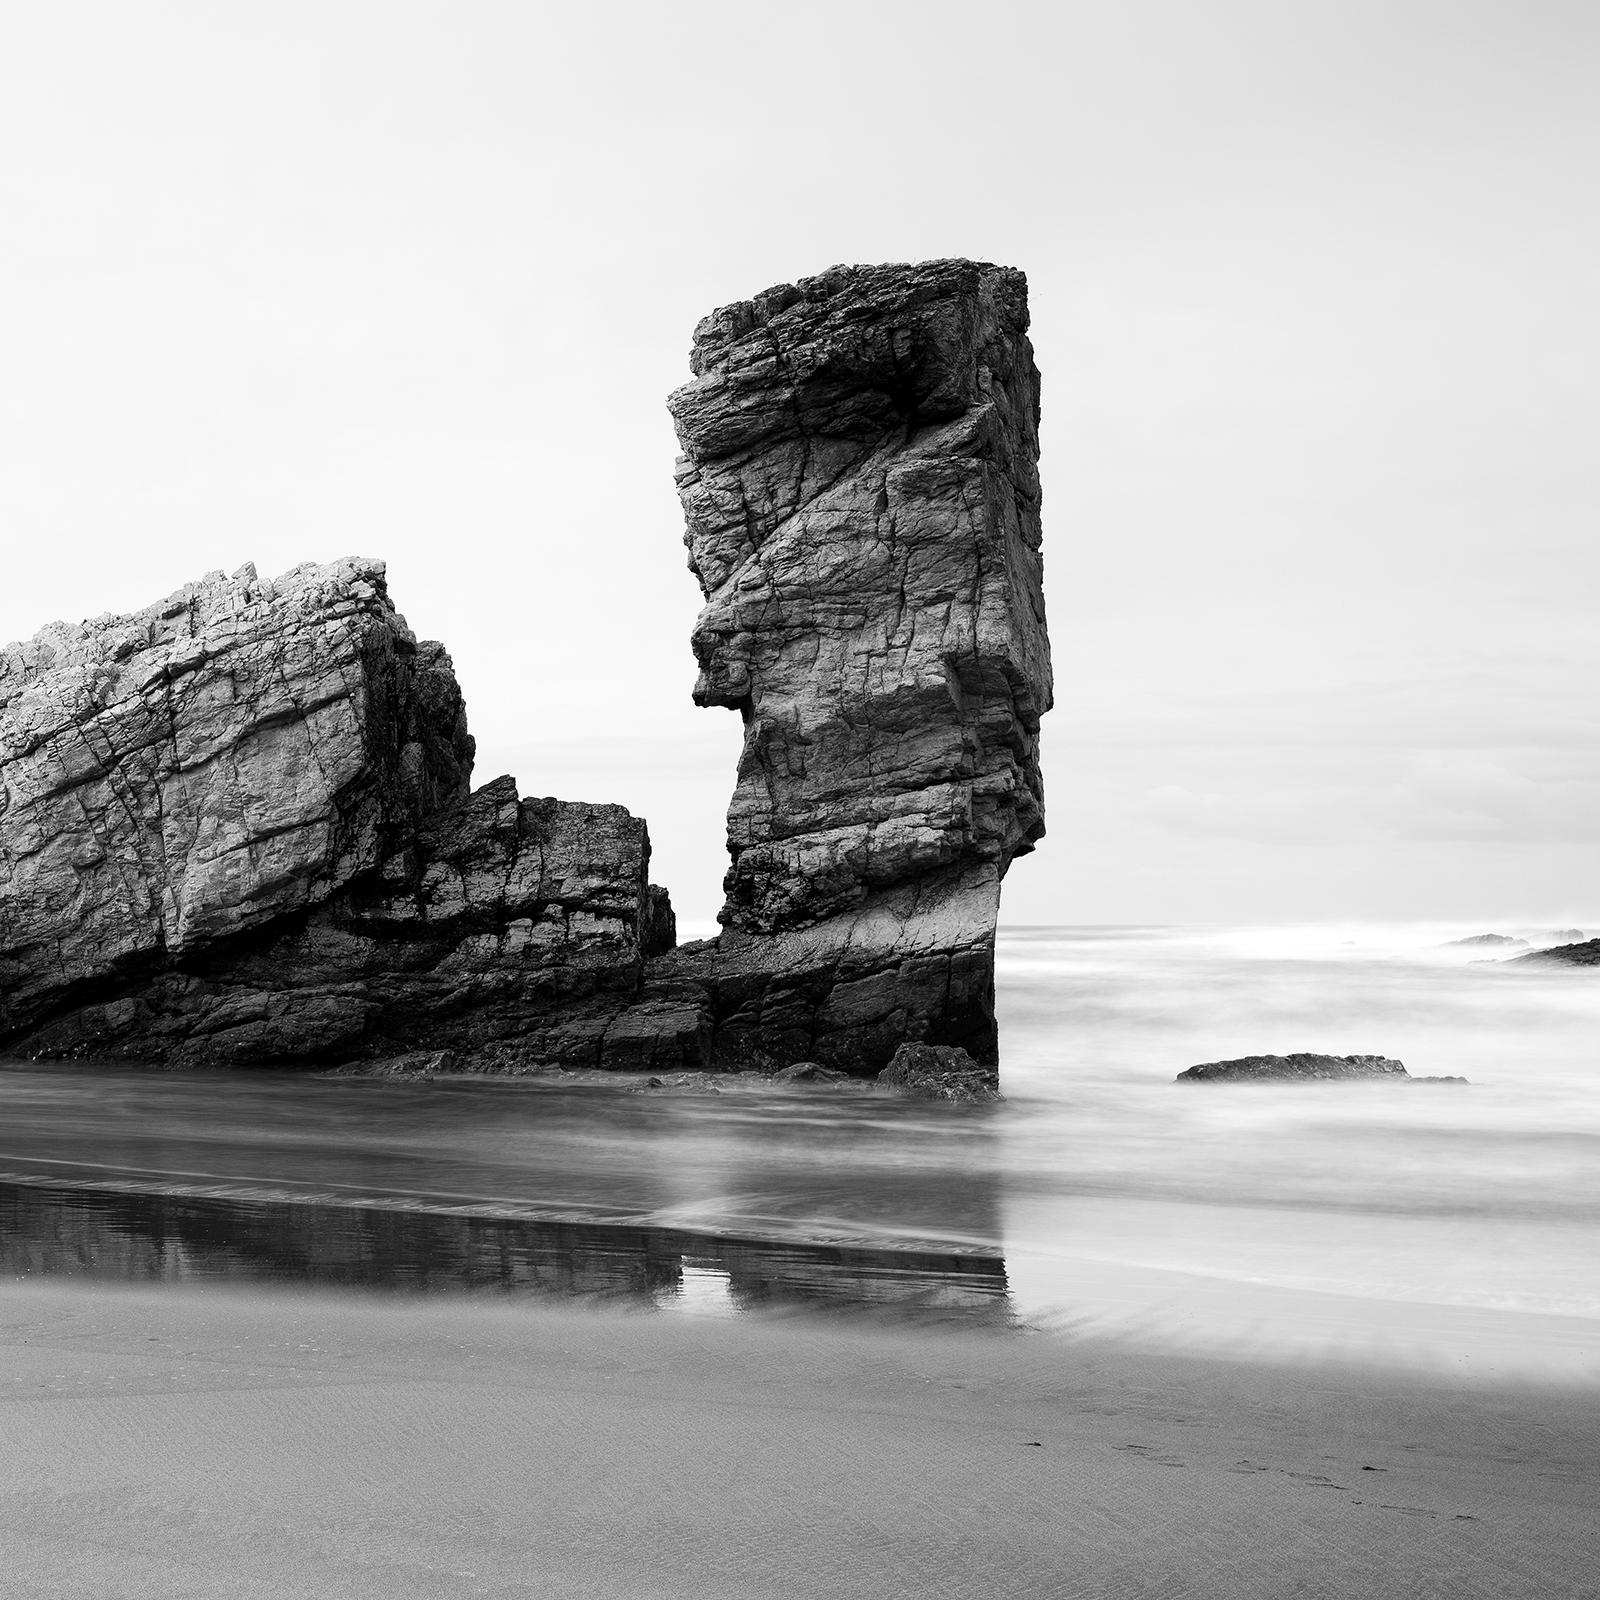 Bay of Biscay, giant rock, beach, Spain, black and white photography, landscape For Sale 5